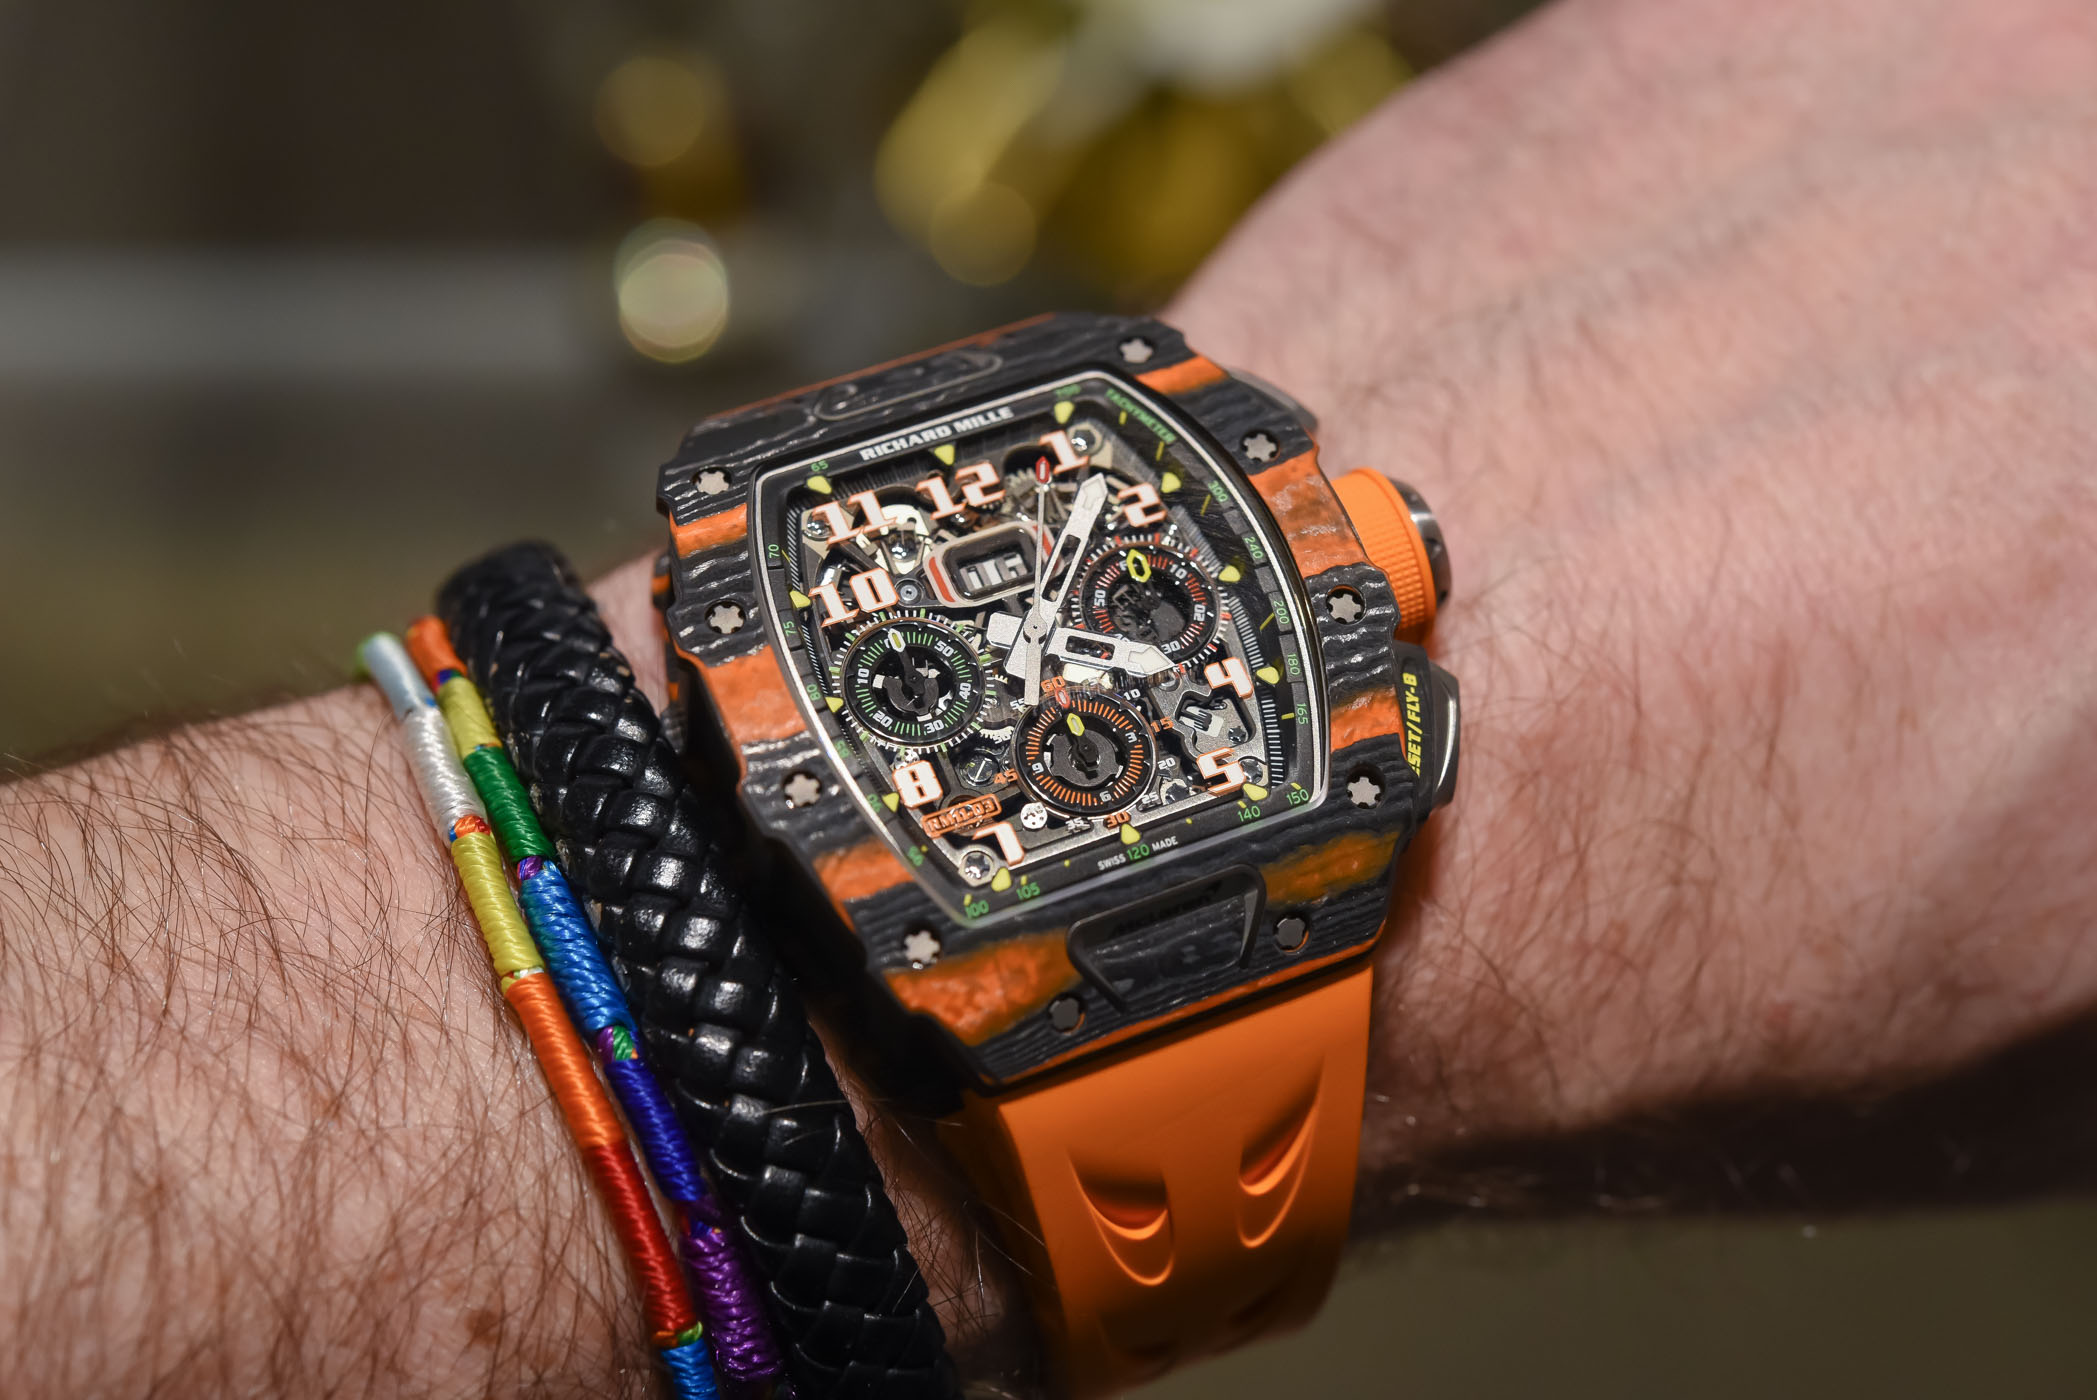 Richard Mille RM 11-03 McLaren Automatic Flyback Chronograph